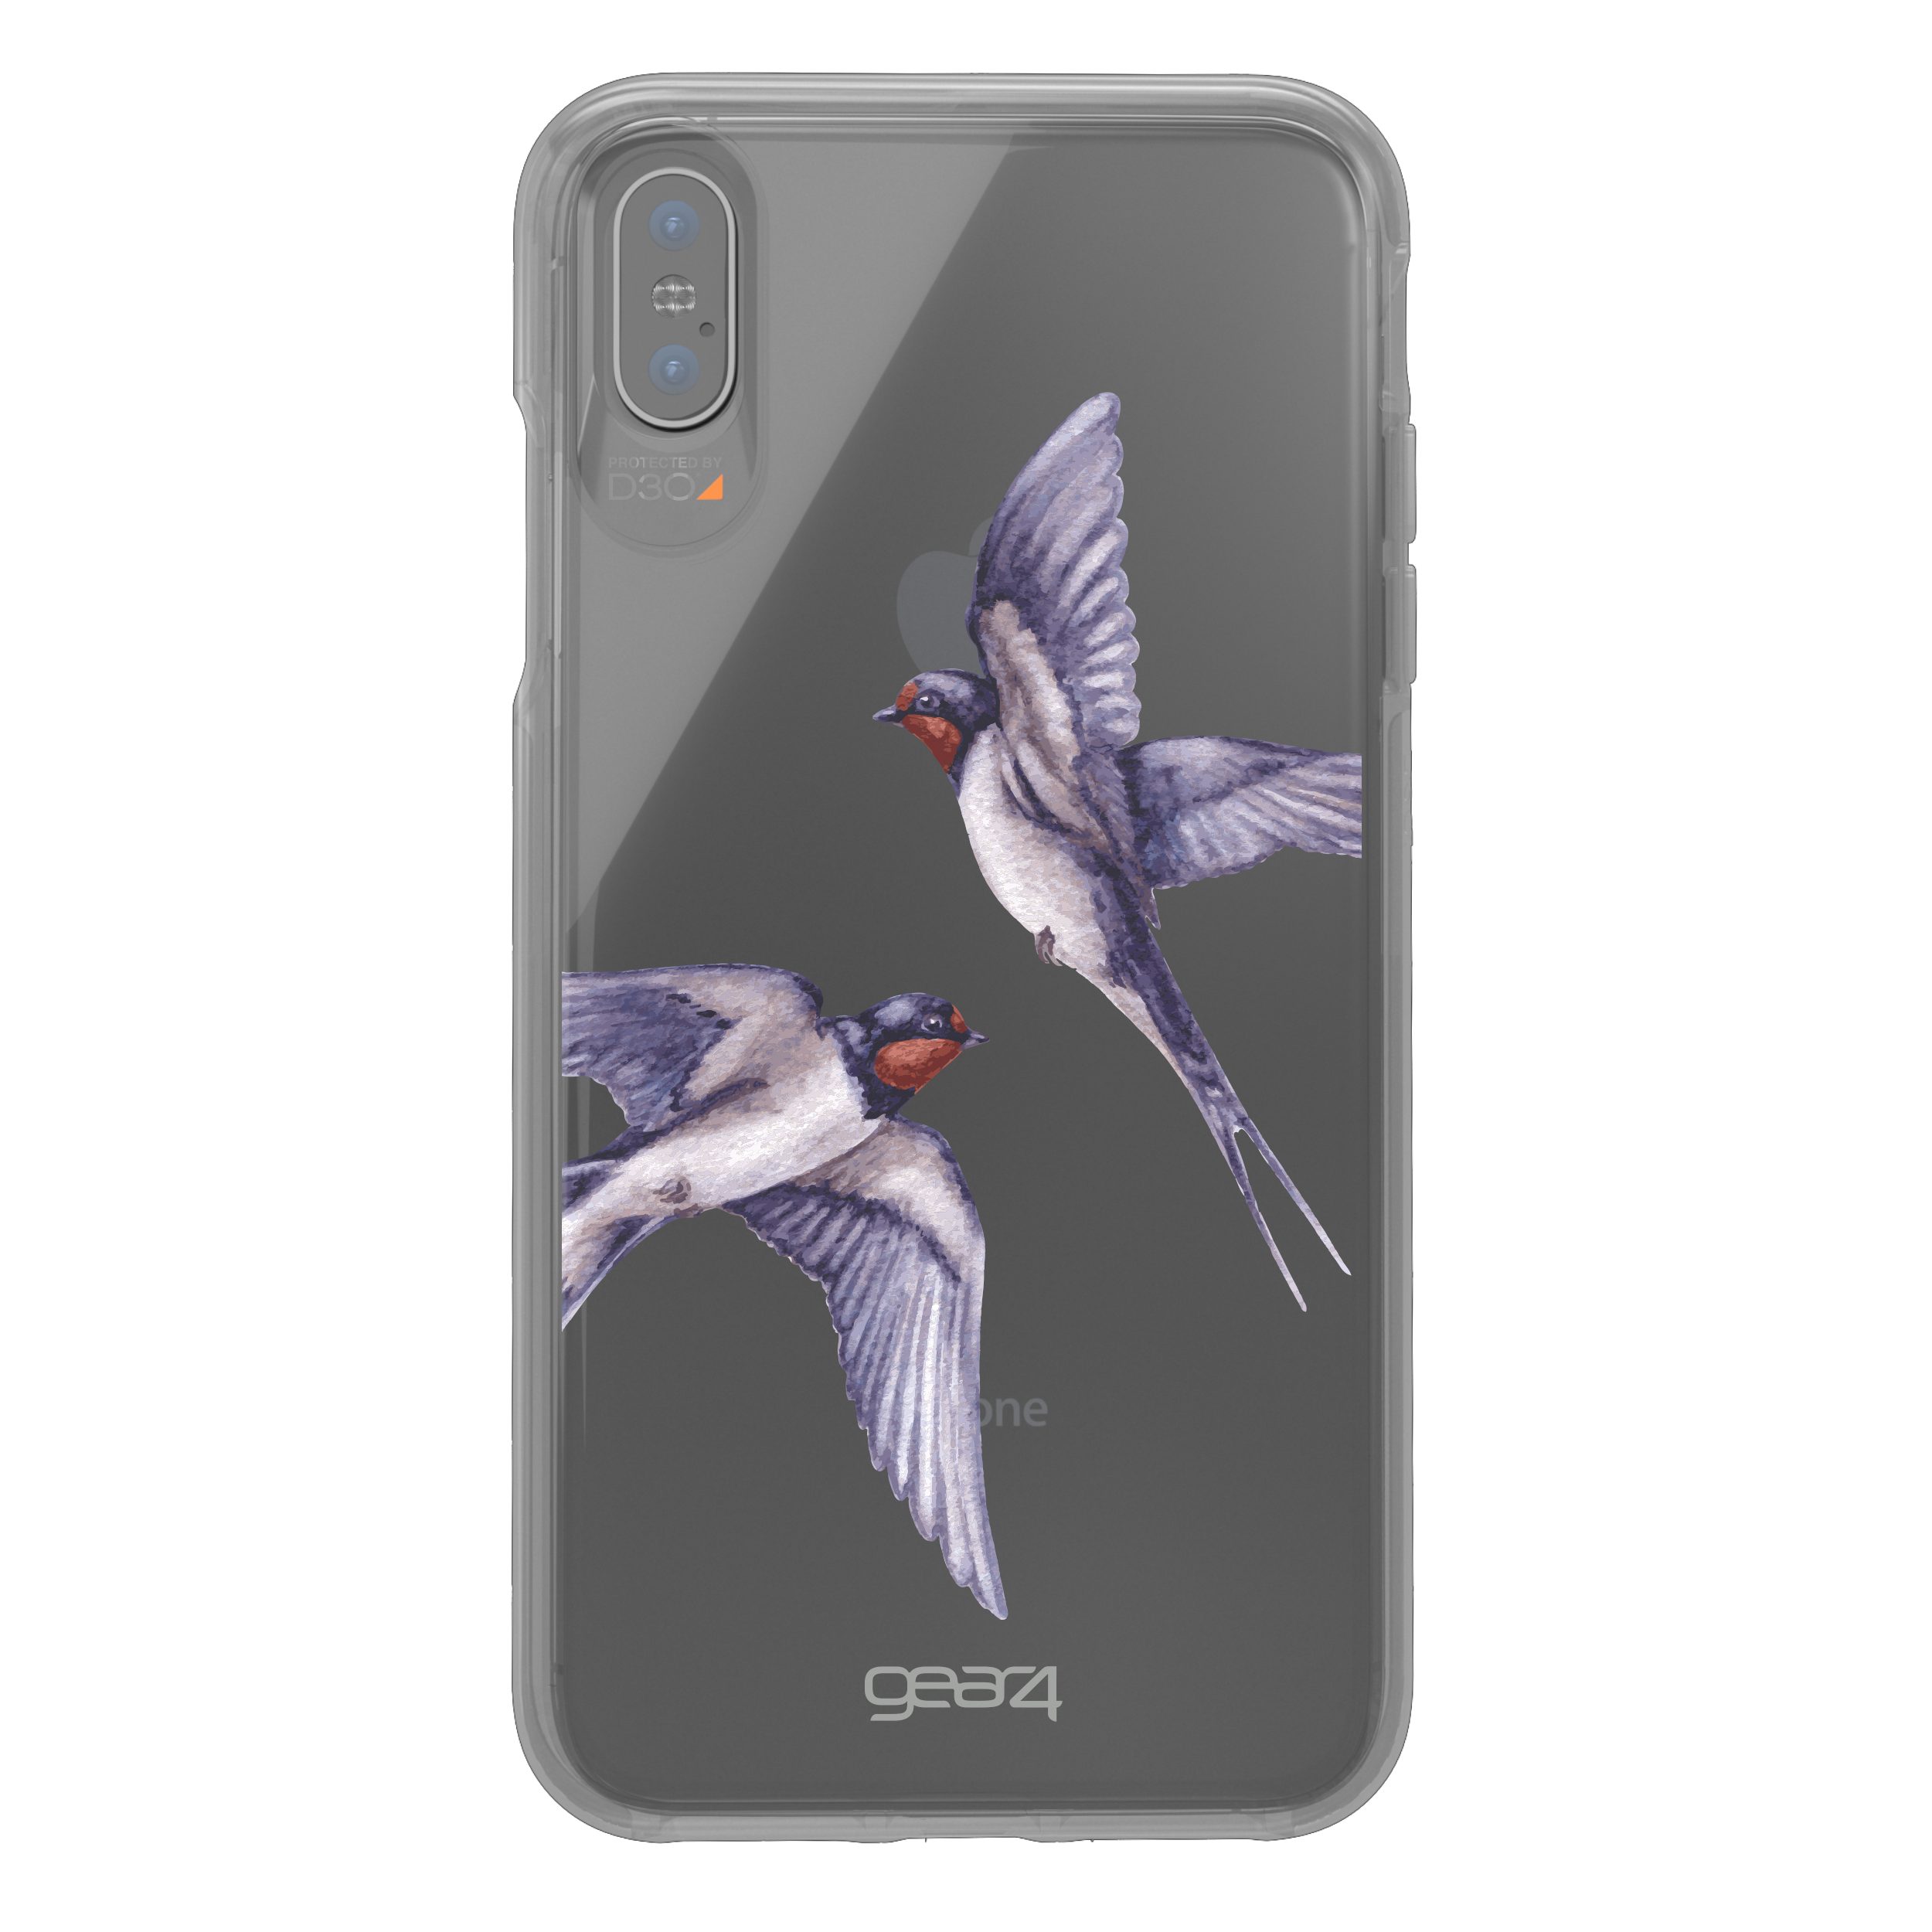 Gear4 Backcover Chelsea Animal Kingdom for iPhone X/Xs 35257 BUNT